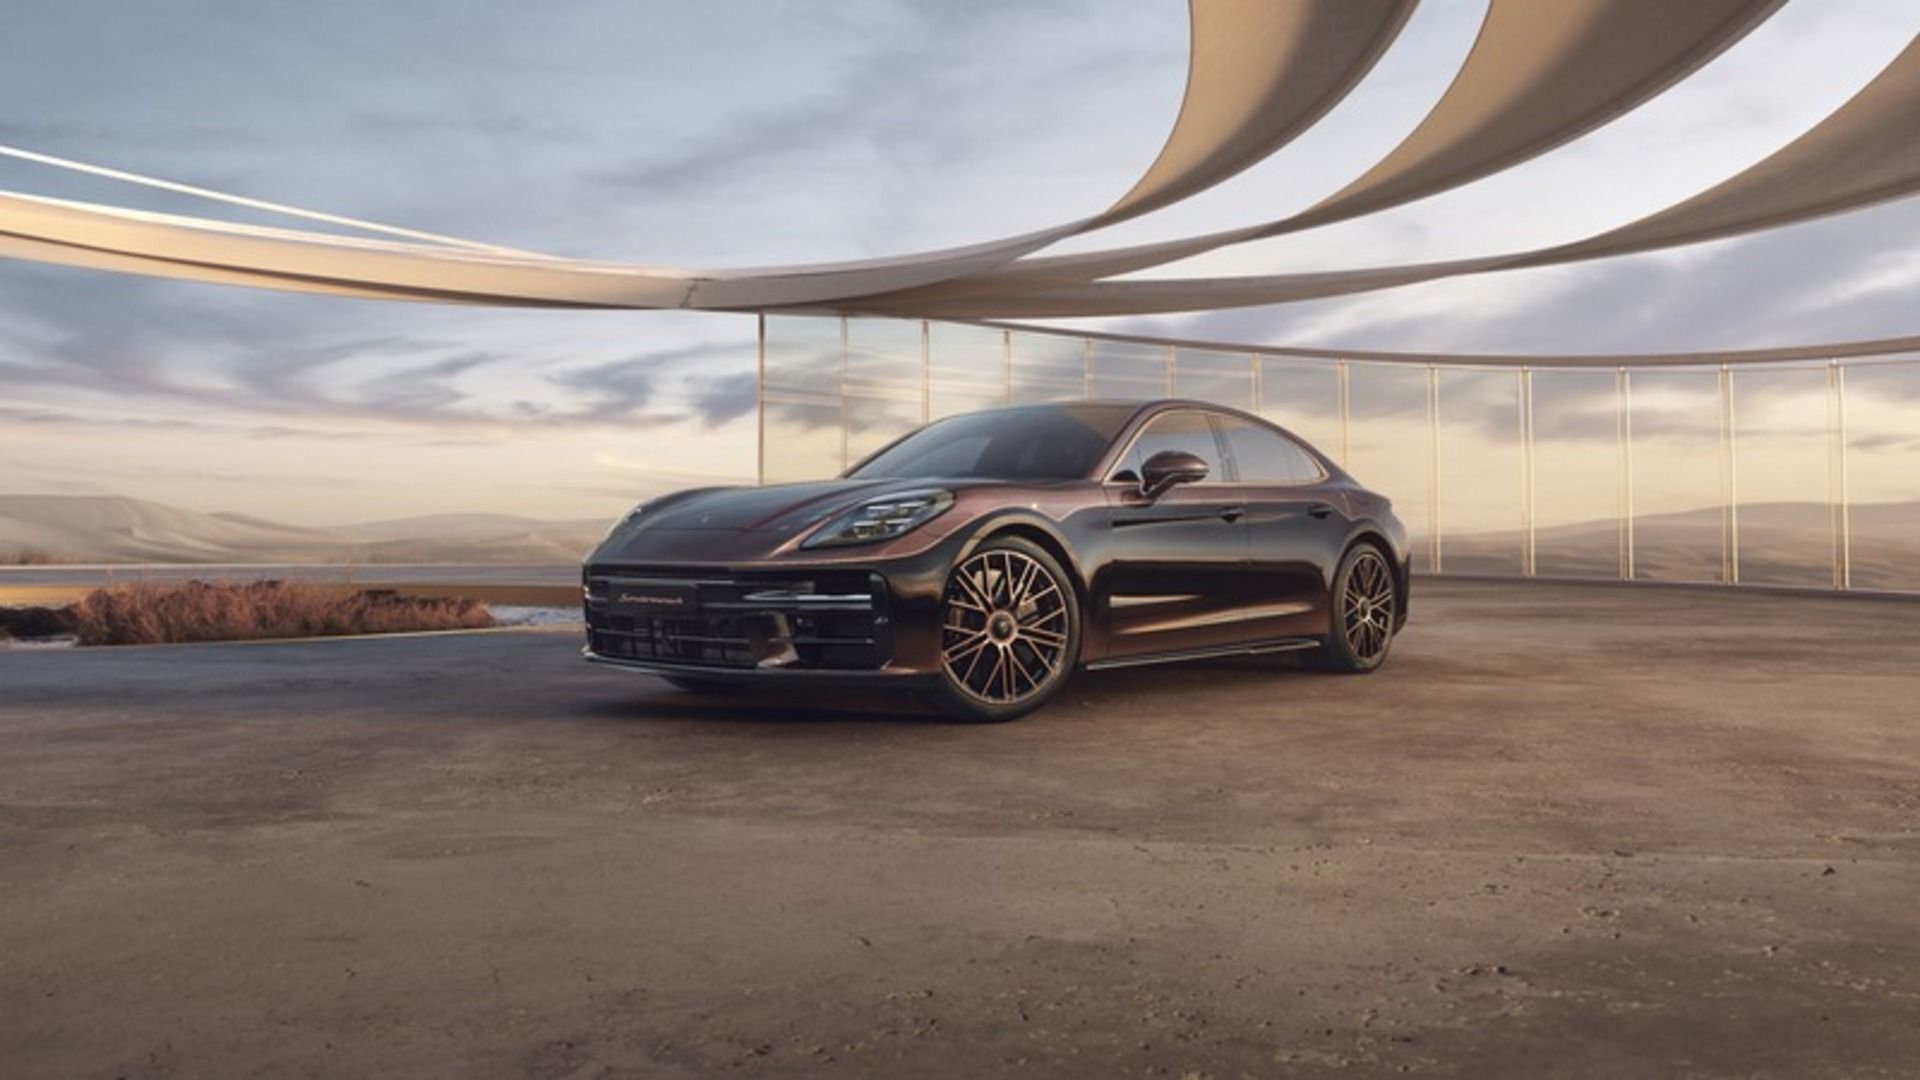 2023 Porsche Panamera Prices, Reviews, and Photos - MotorTrend